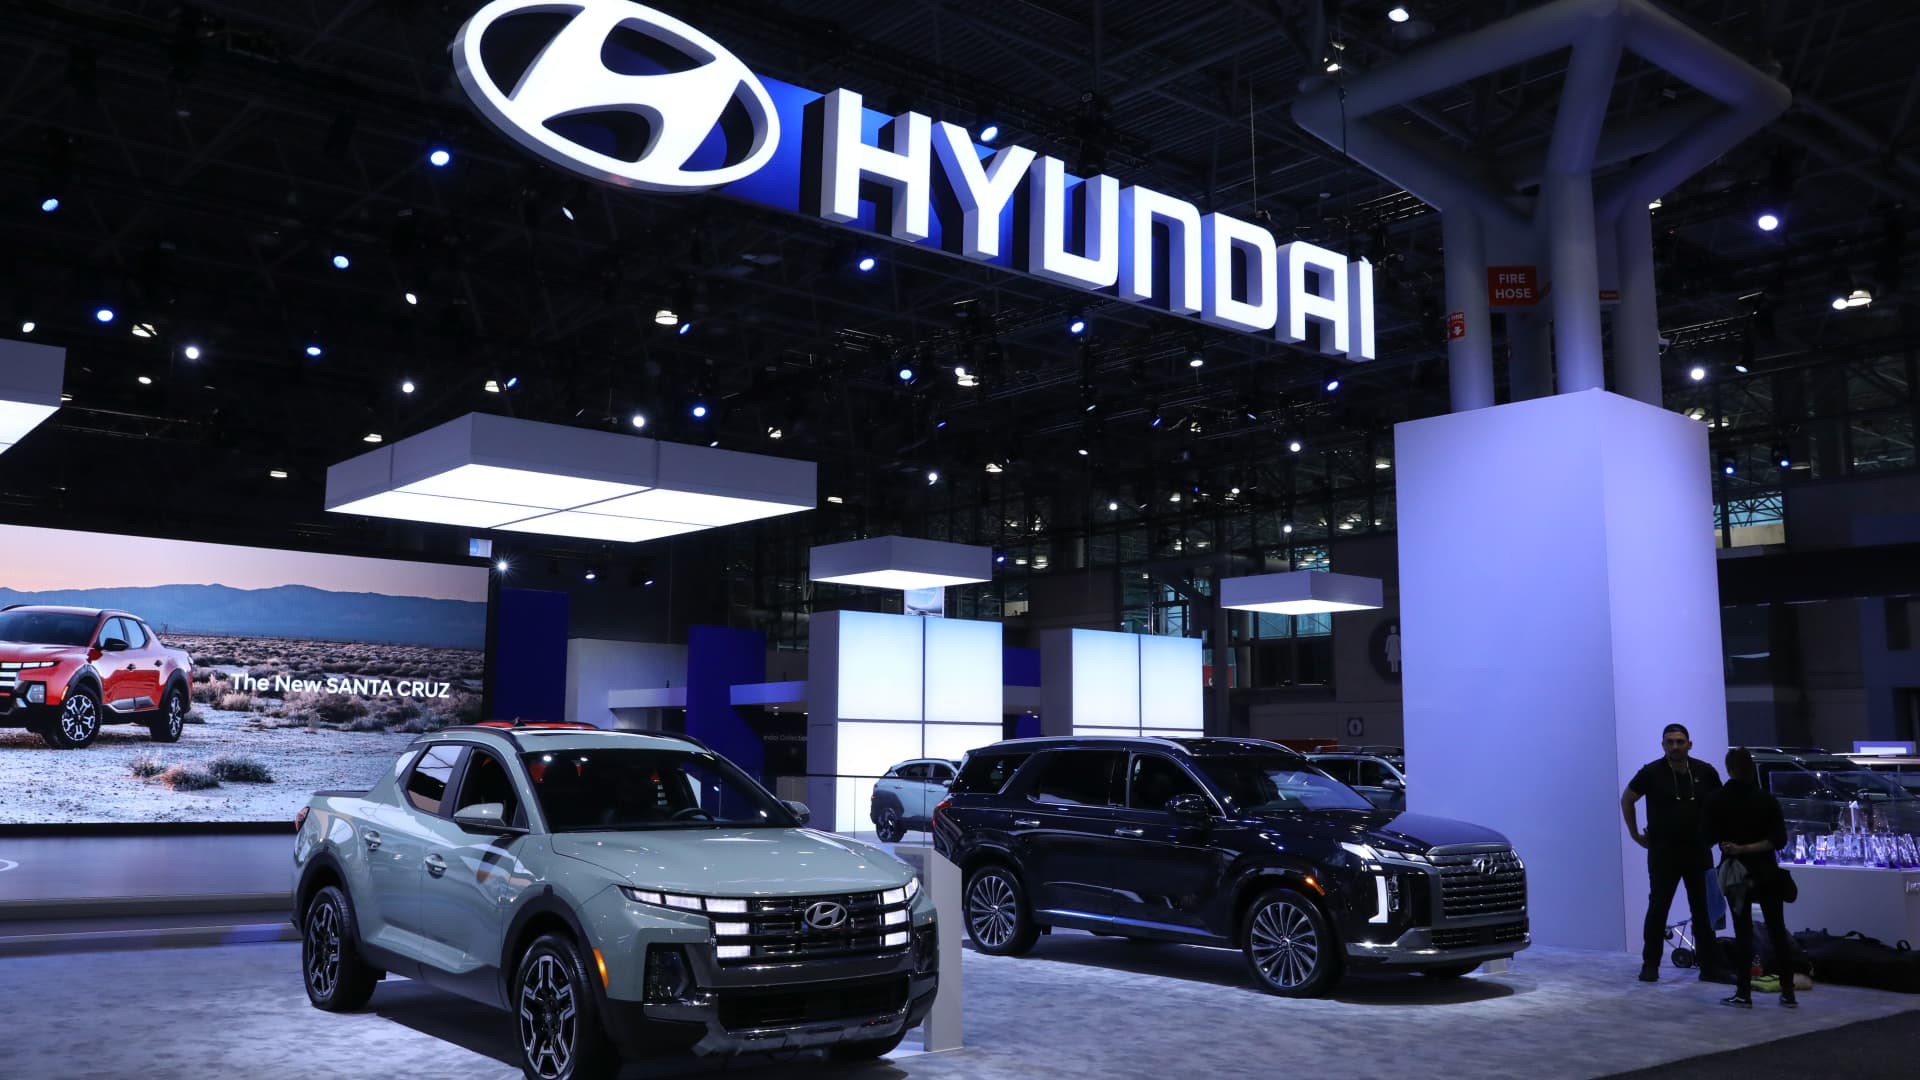 Hyundai posts record second-quarter profit on strong U.S. sales, boosts hybrid offerings